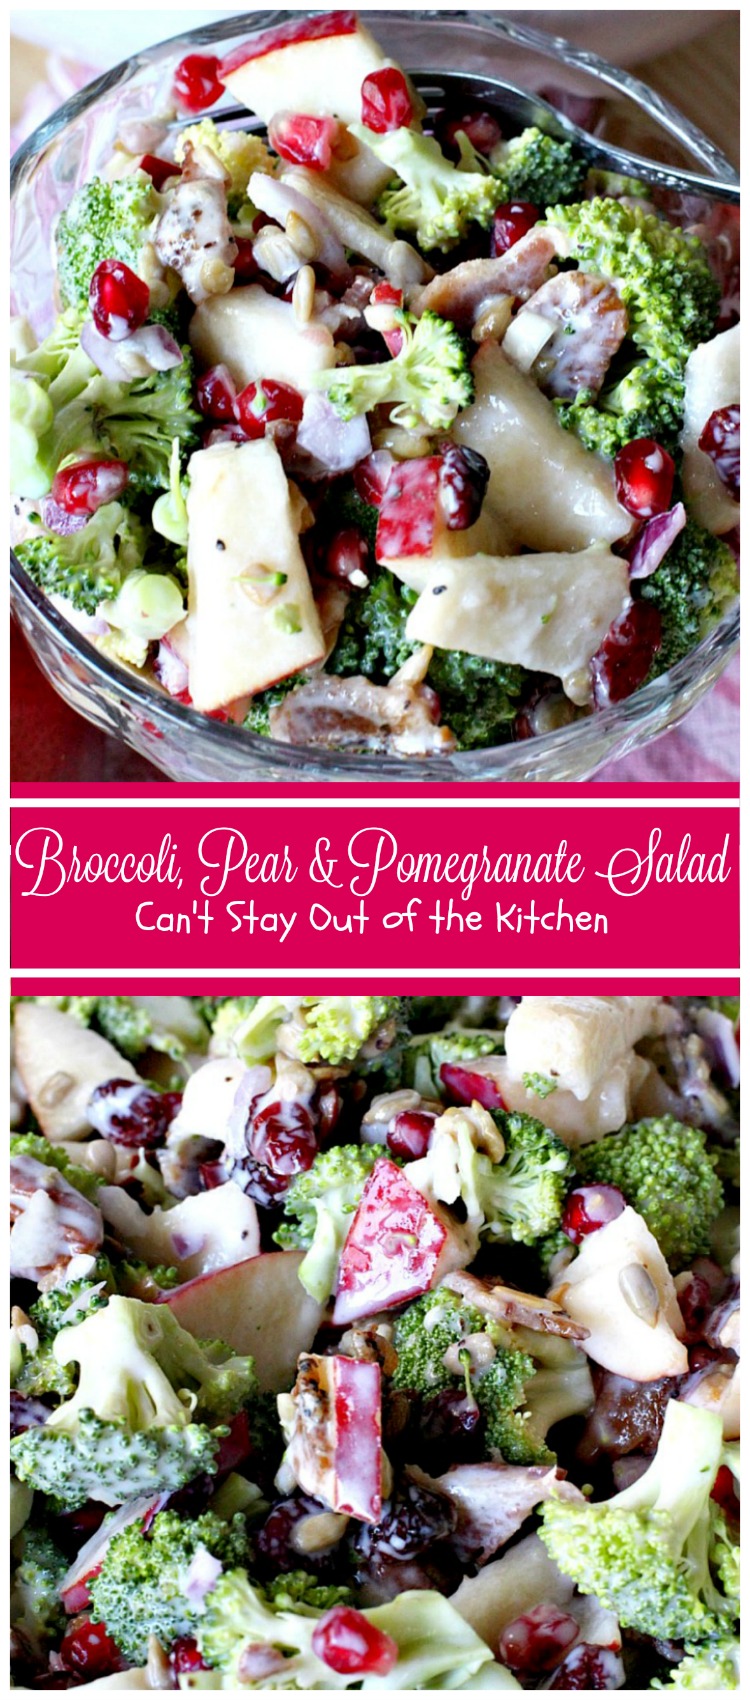 Broccoli, Pear and Pomegranate Salad | Can't Stay Out of the Kitchen